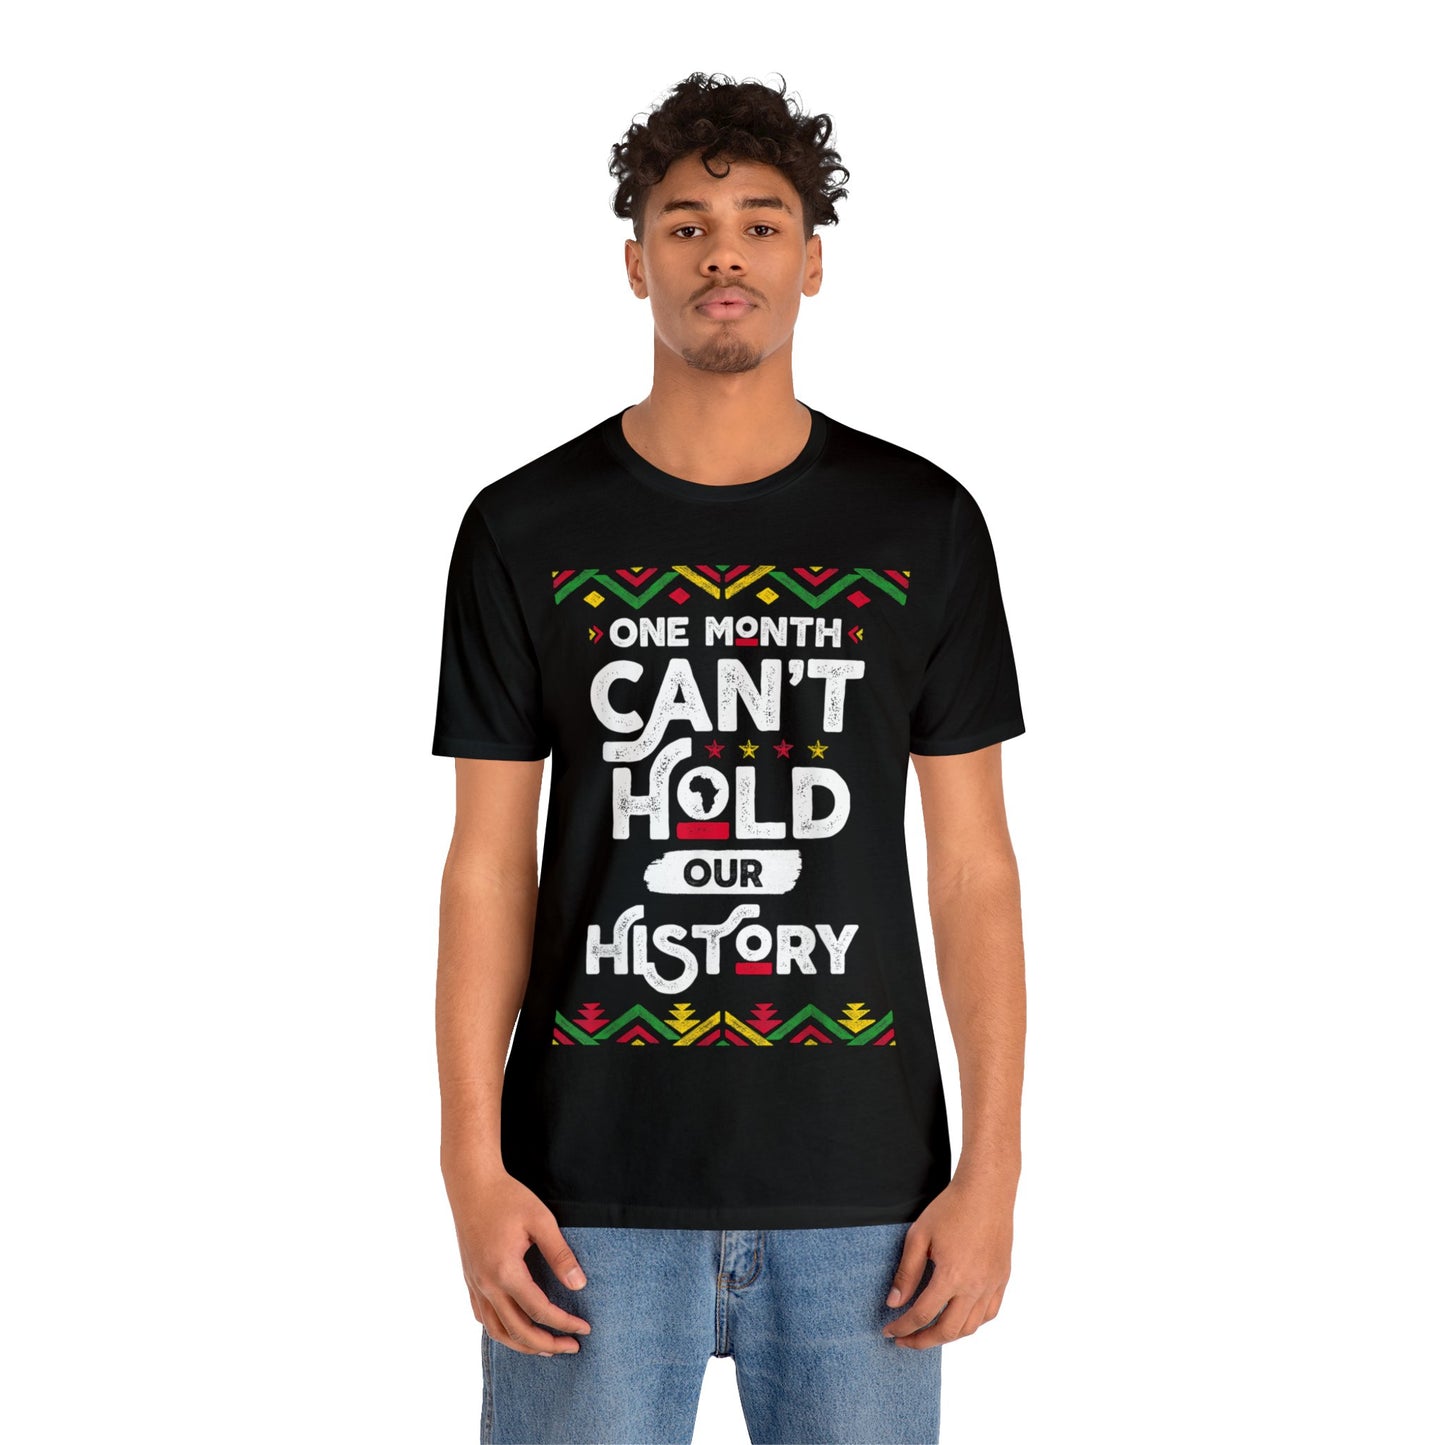 One Month Can't Hold Our History - Bella Canvas -  Unisex Jersey Short Sleeve Tee